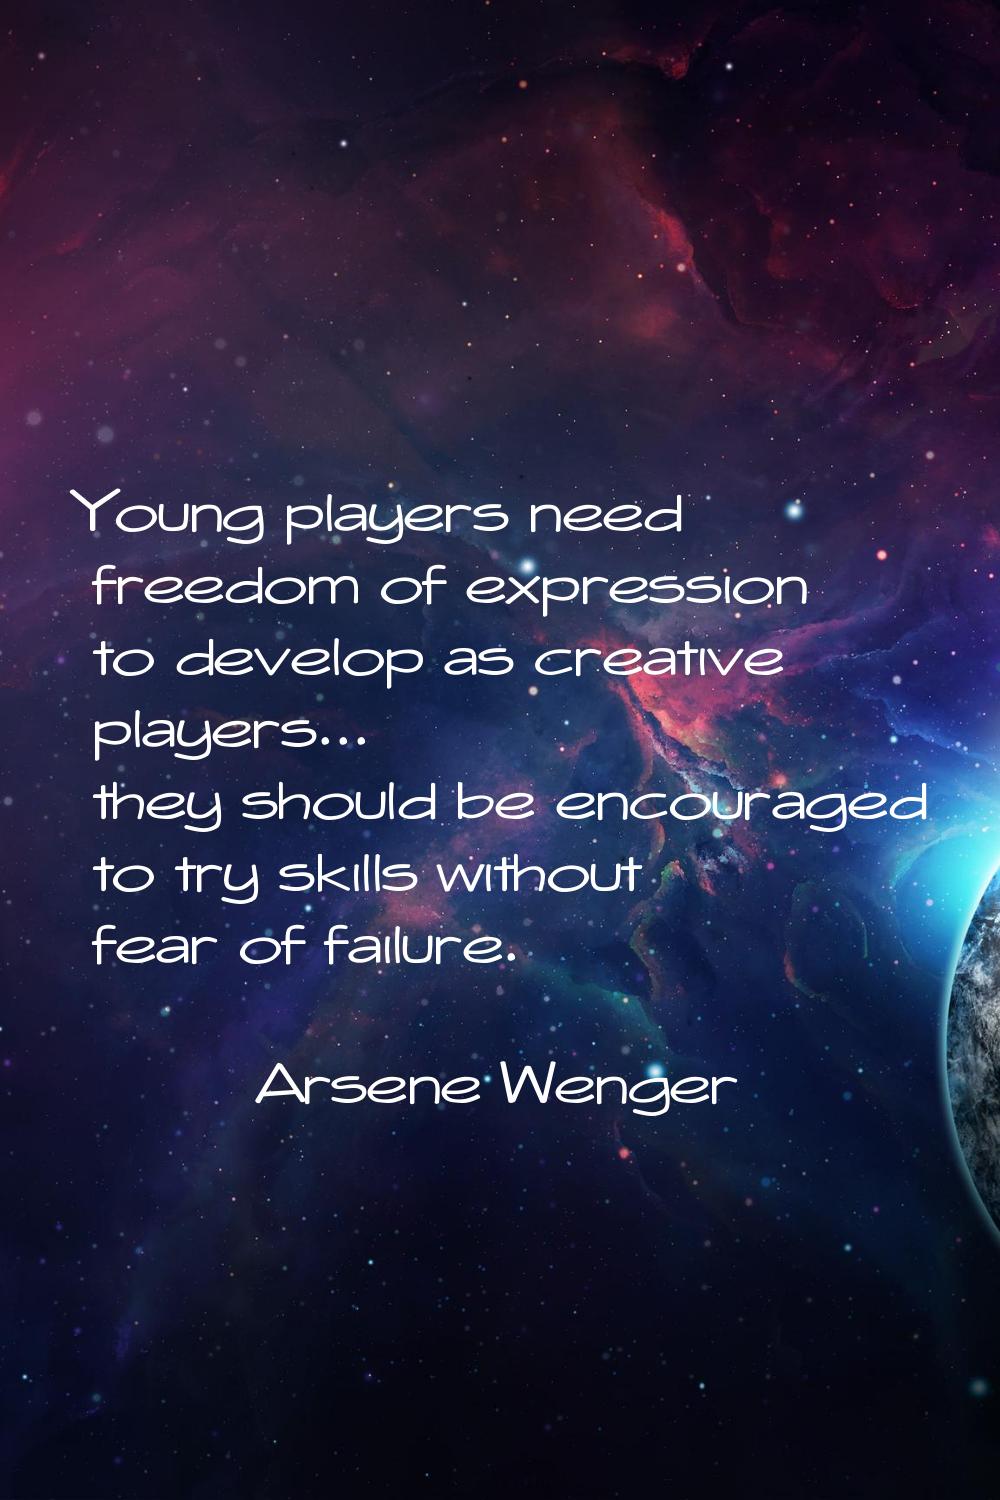 Young players need freedom of expression to develop as creative players... they should be encourage